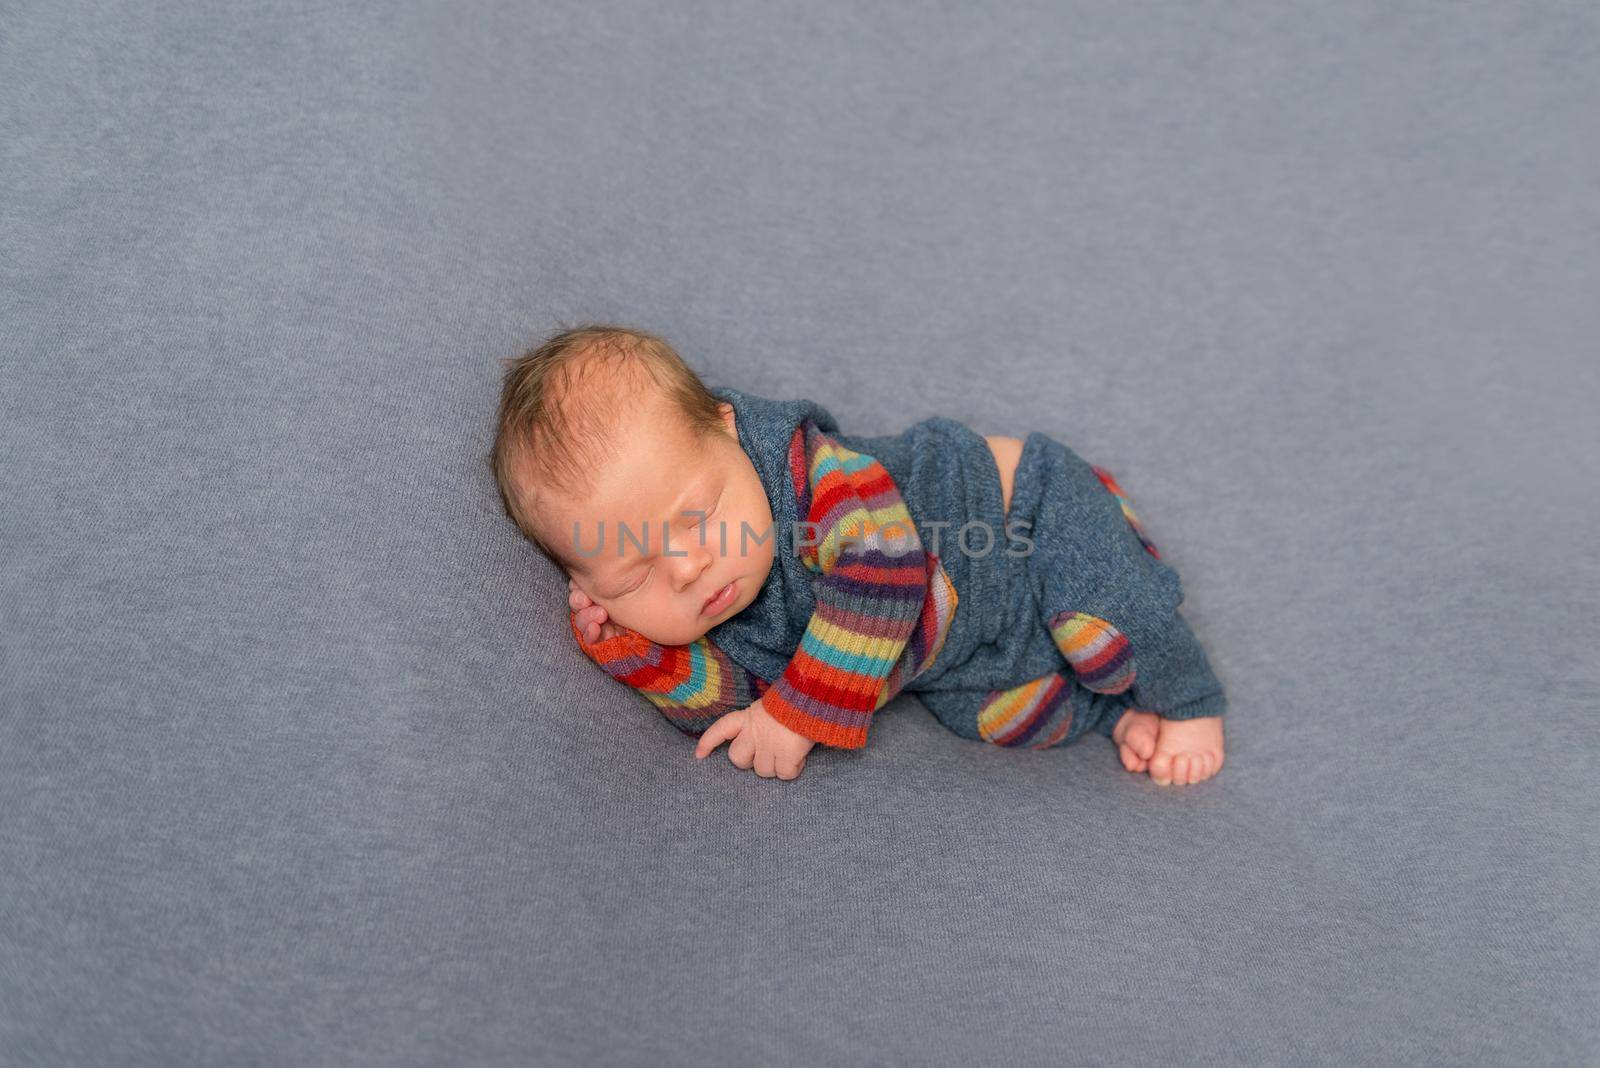 Sweet hairy newborn napping on his side, in striped pants and jacket